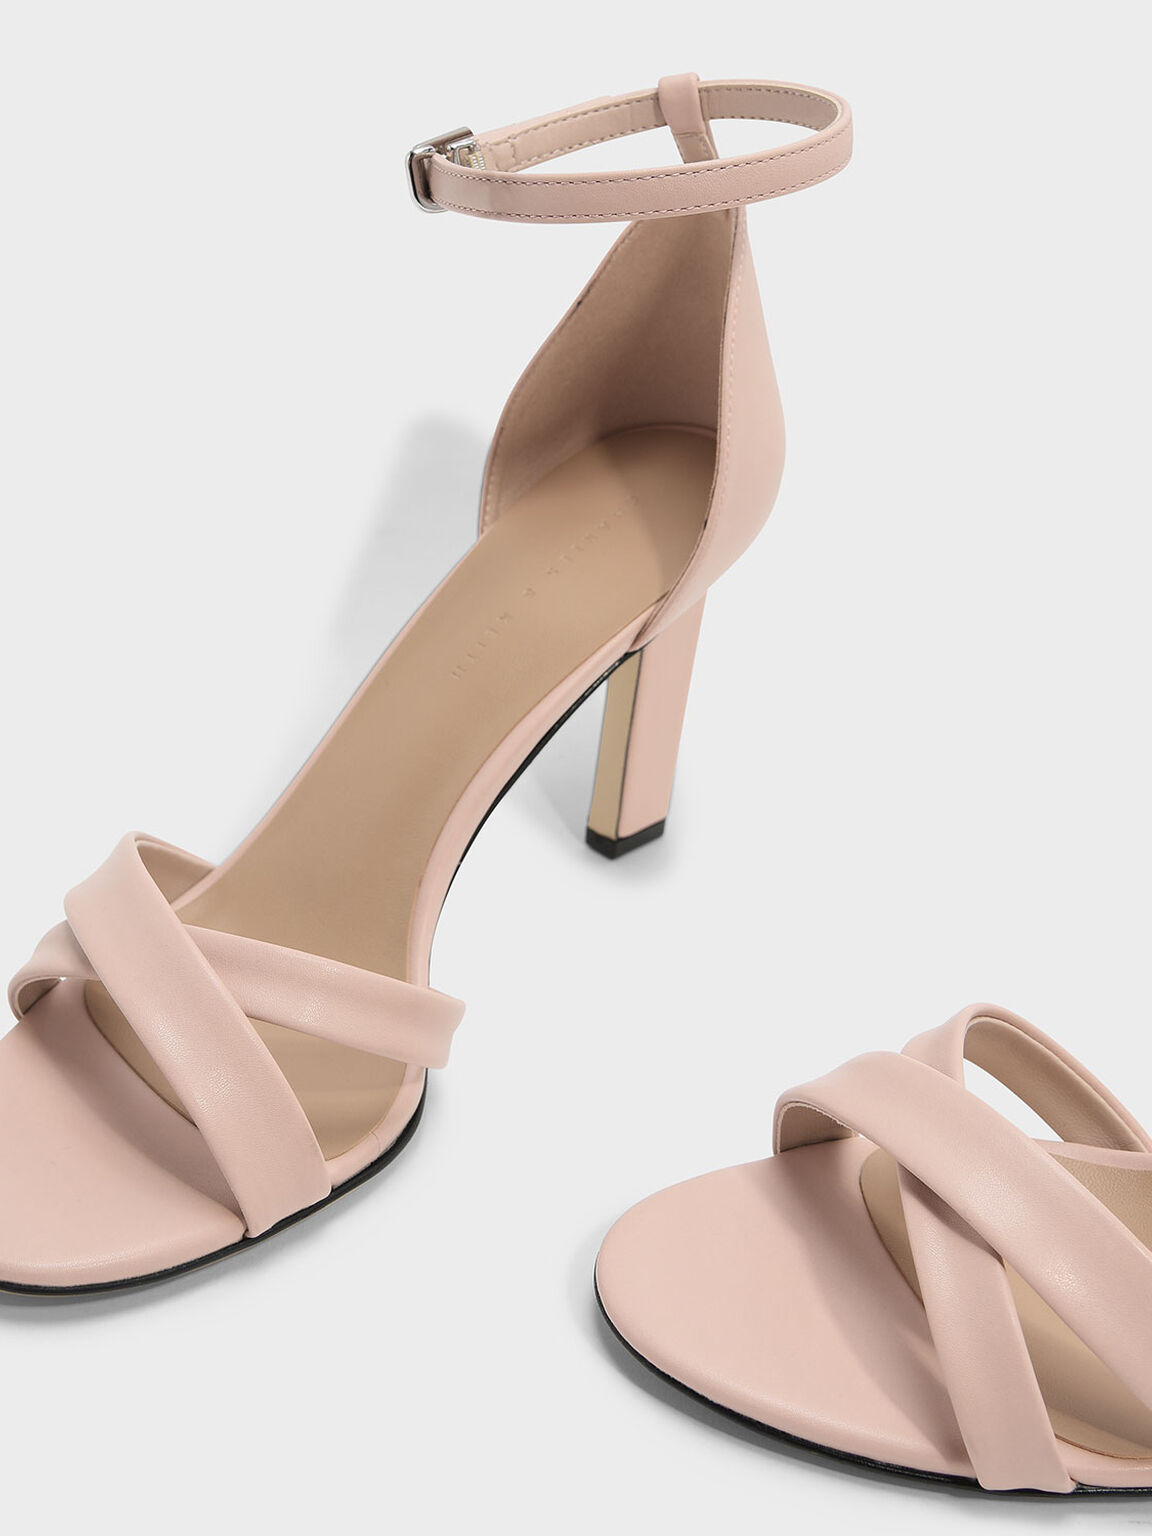 Ankle Strap Criss Cross Heeled Sandals, Nude, hi-res